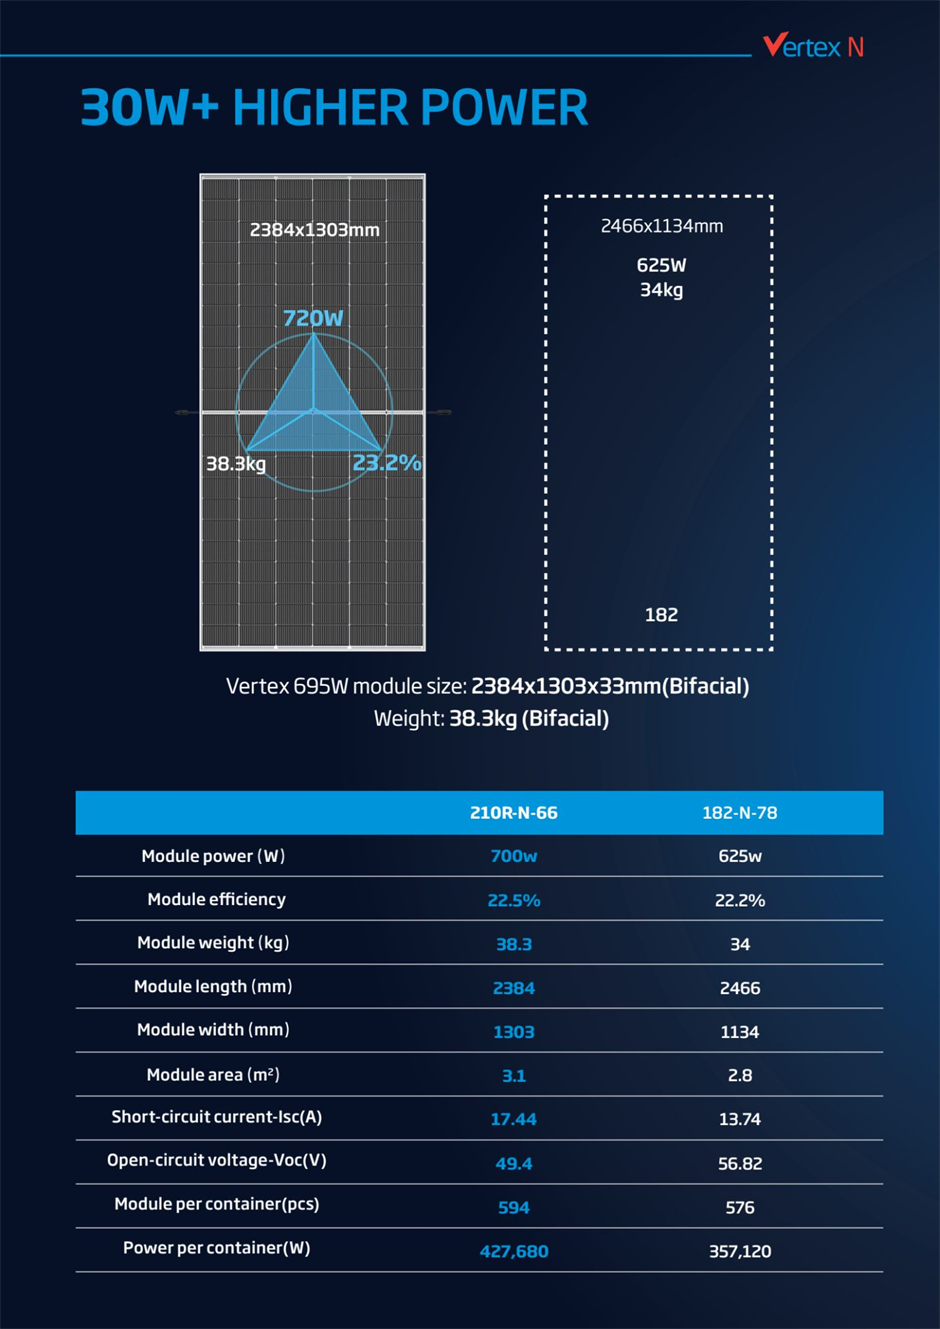 Technical comparison between the Trinasolar Vertex N 720W n-type bifacial solar panel and a similar 182-based module shows higher power output, higher efficiency, and higher power per container for the Vertex N 625W bifacial solar module.
